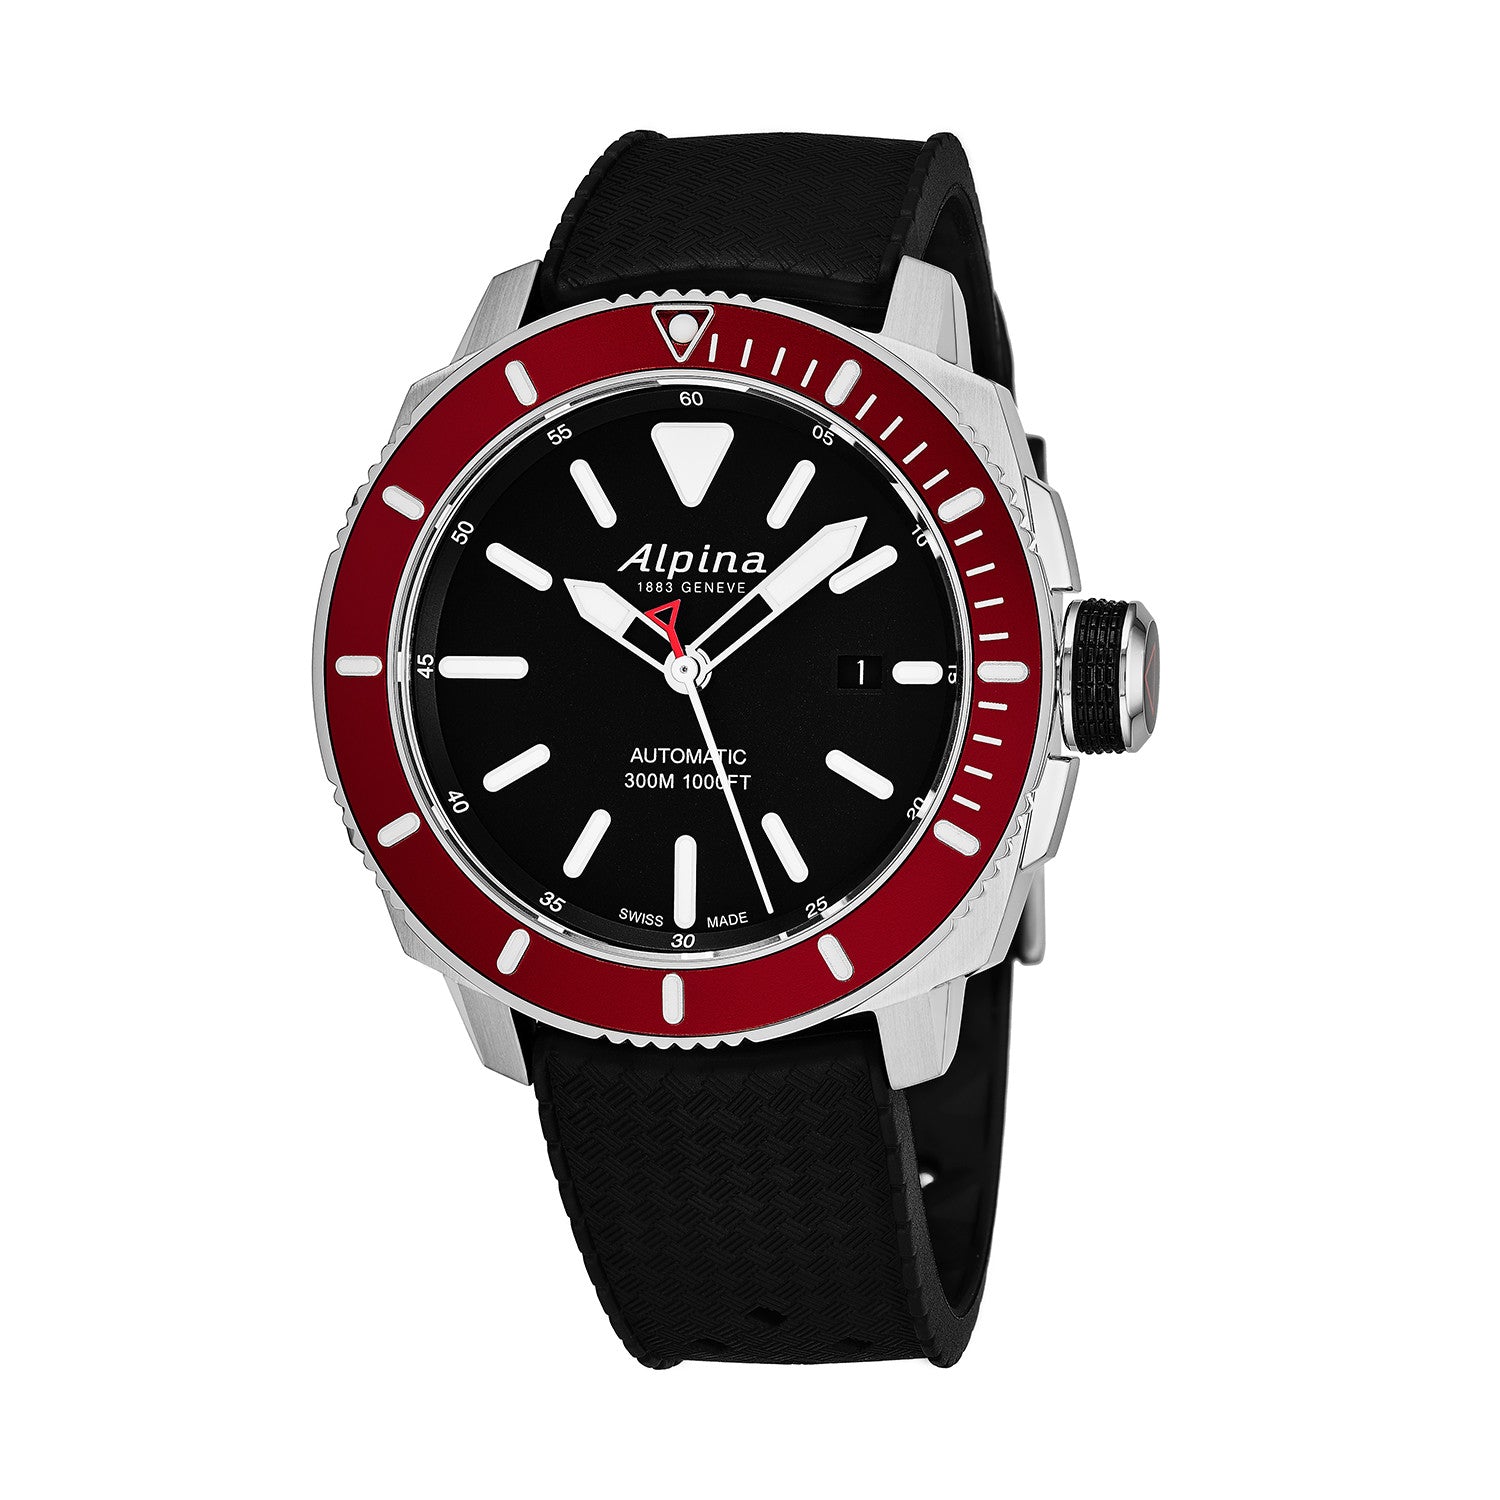 Seatrong Diver 300 Automatic (Black-Red) | Alpina | Luby 